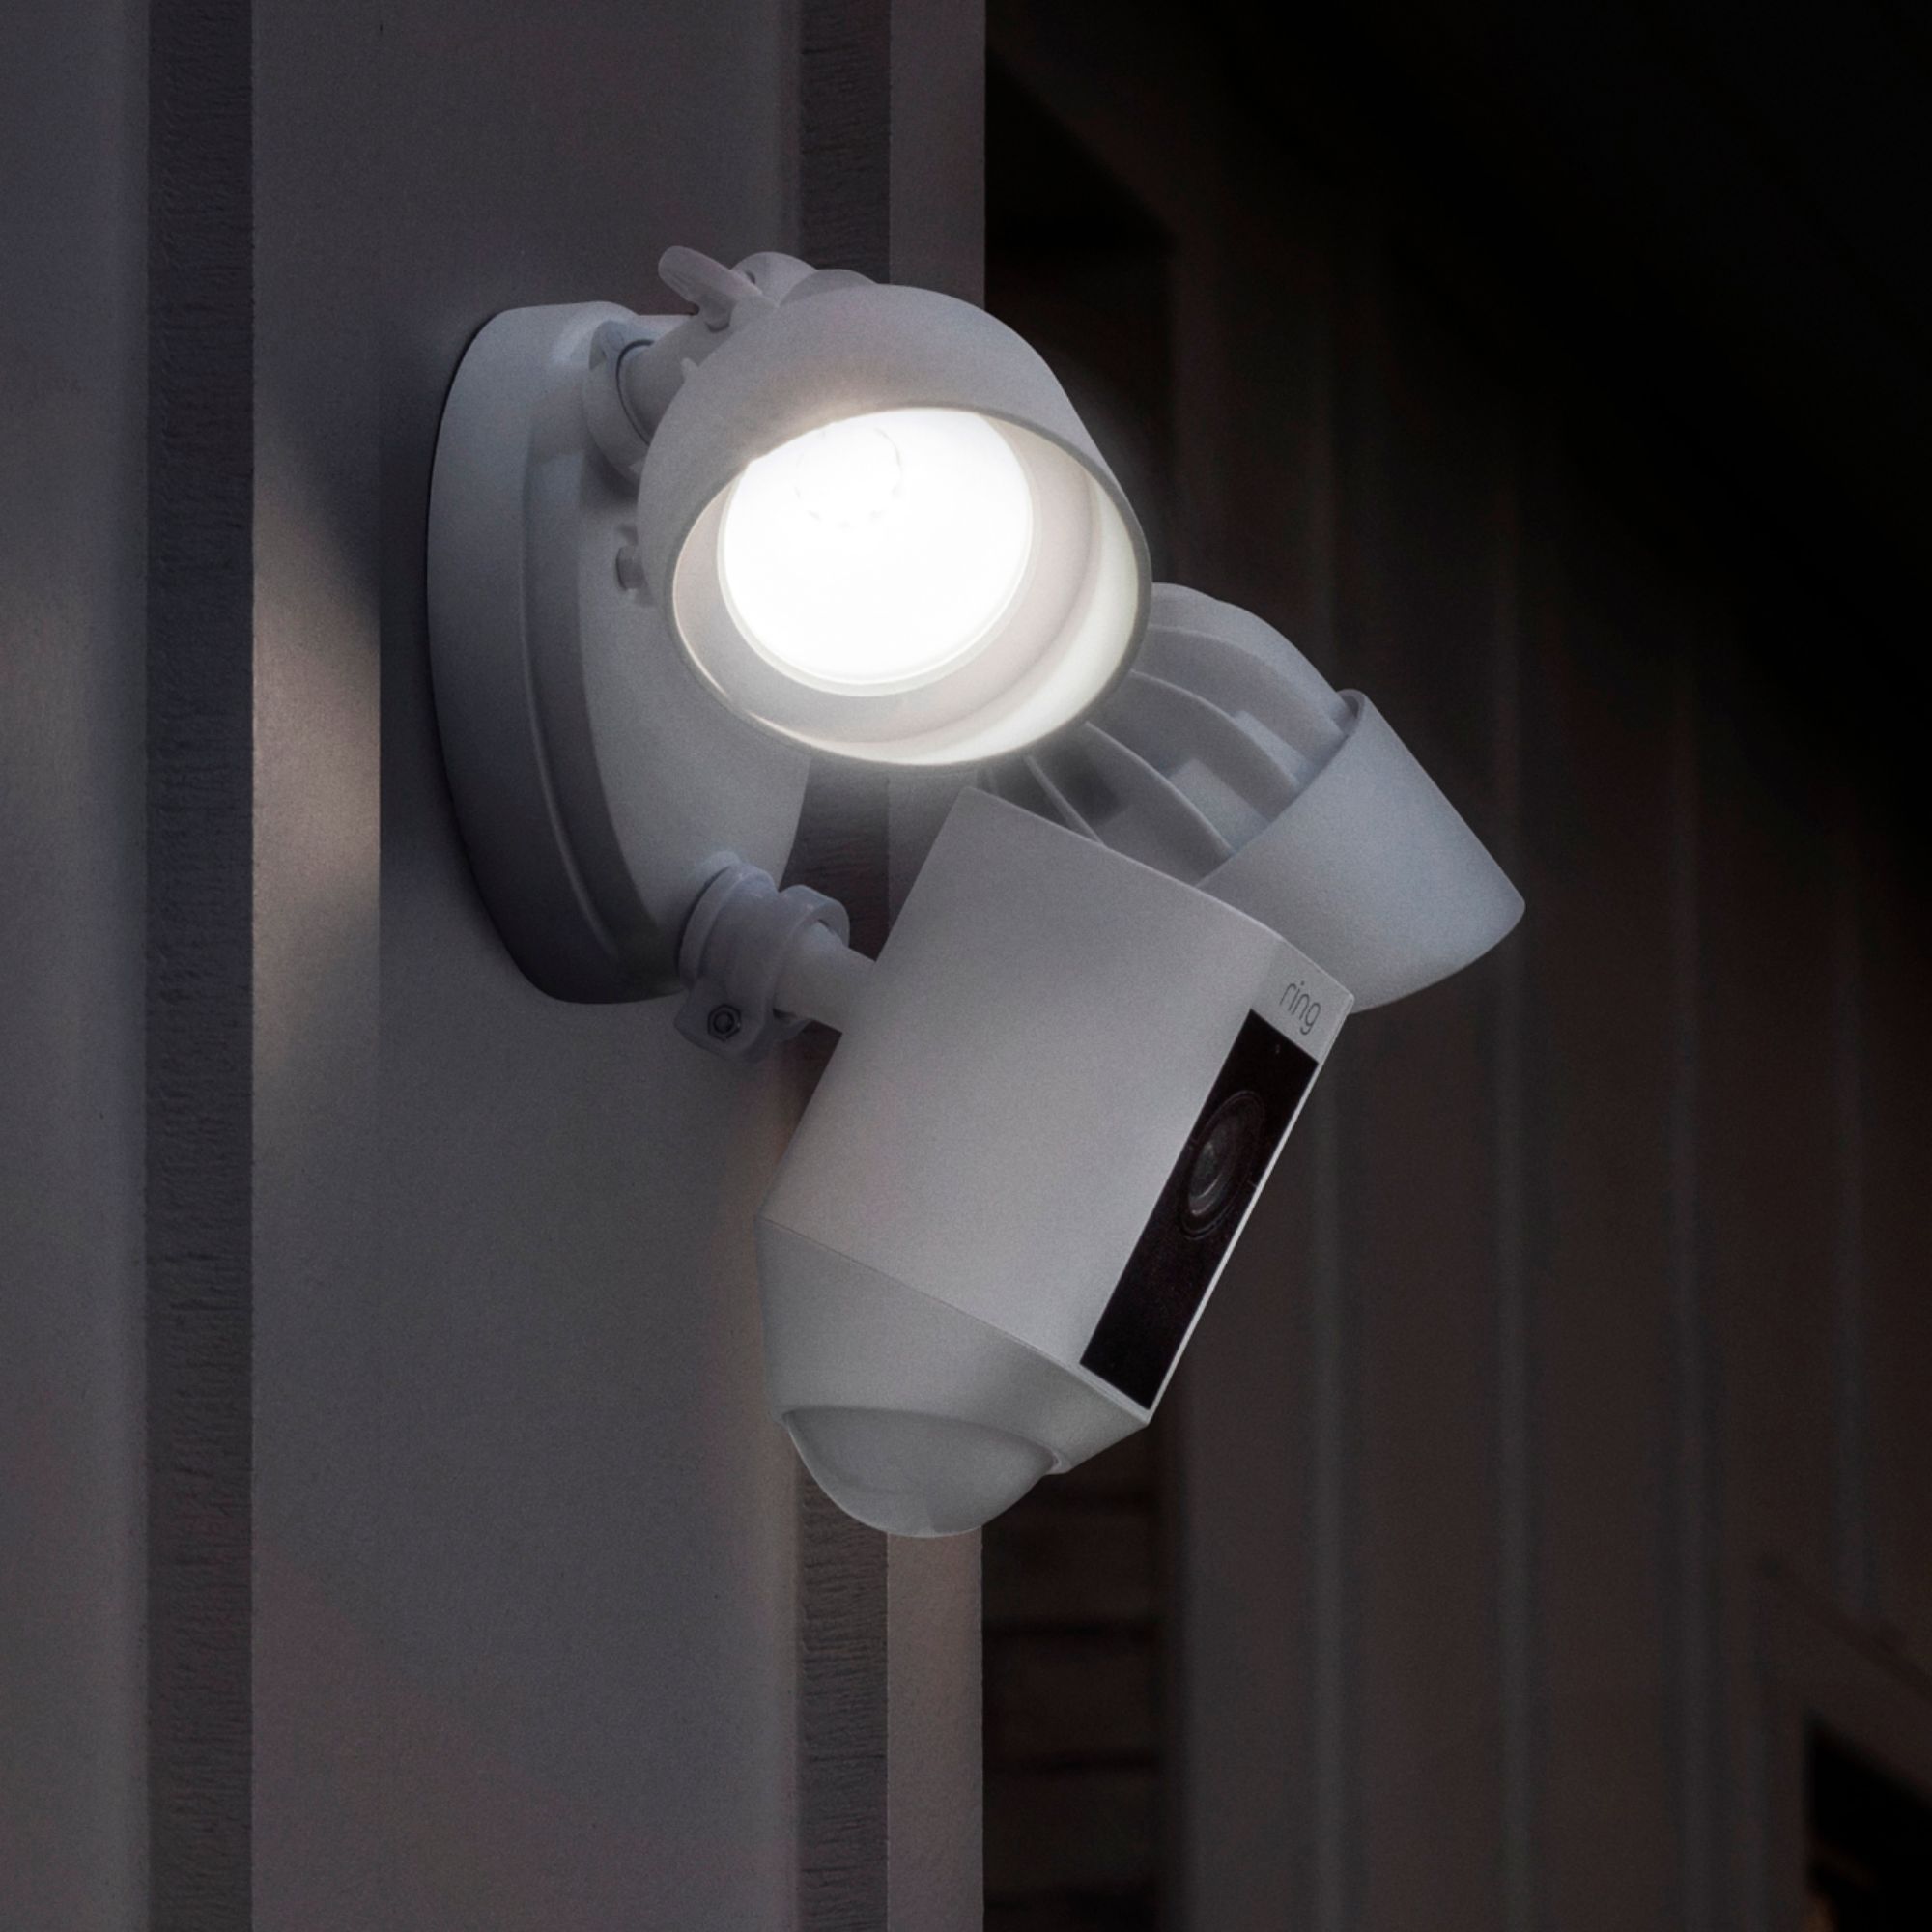 ring doorbell with flood lights